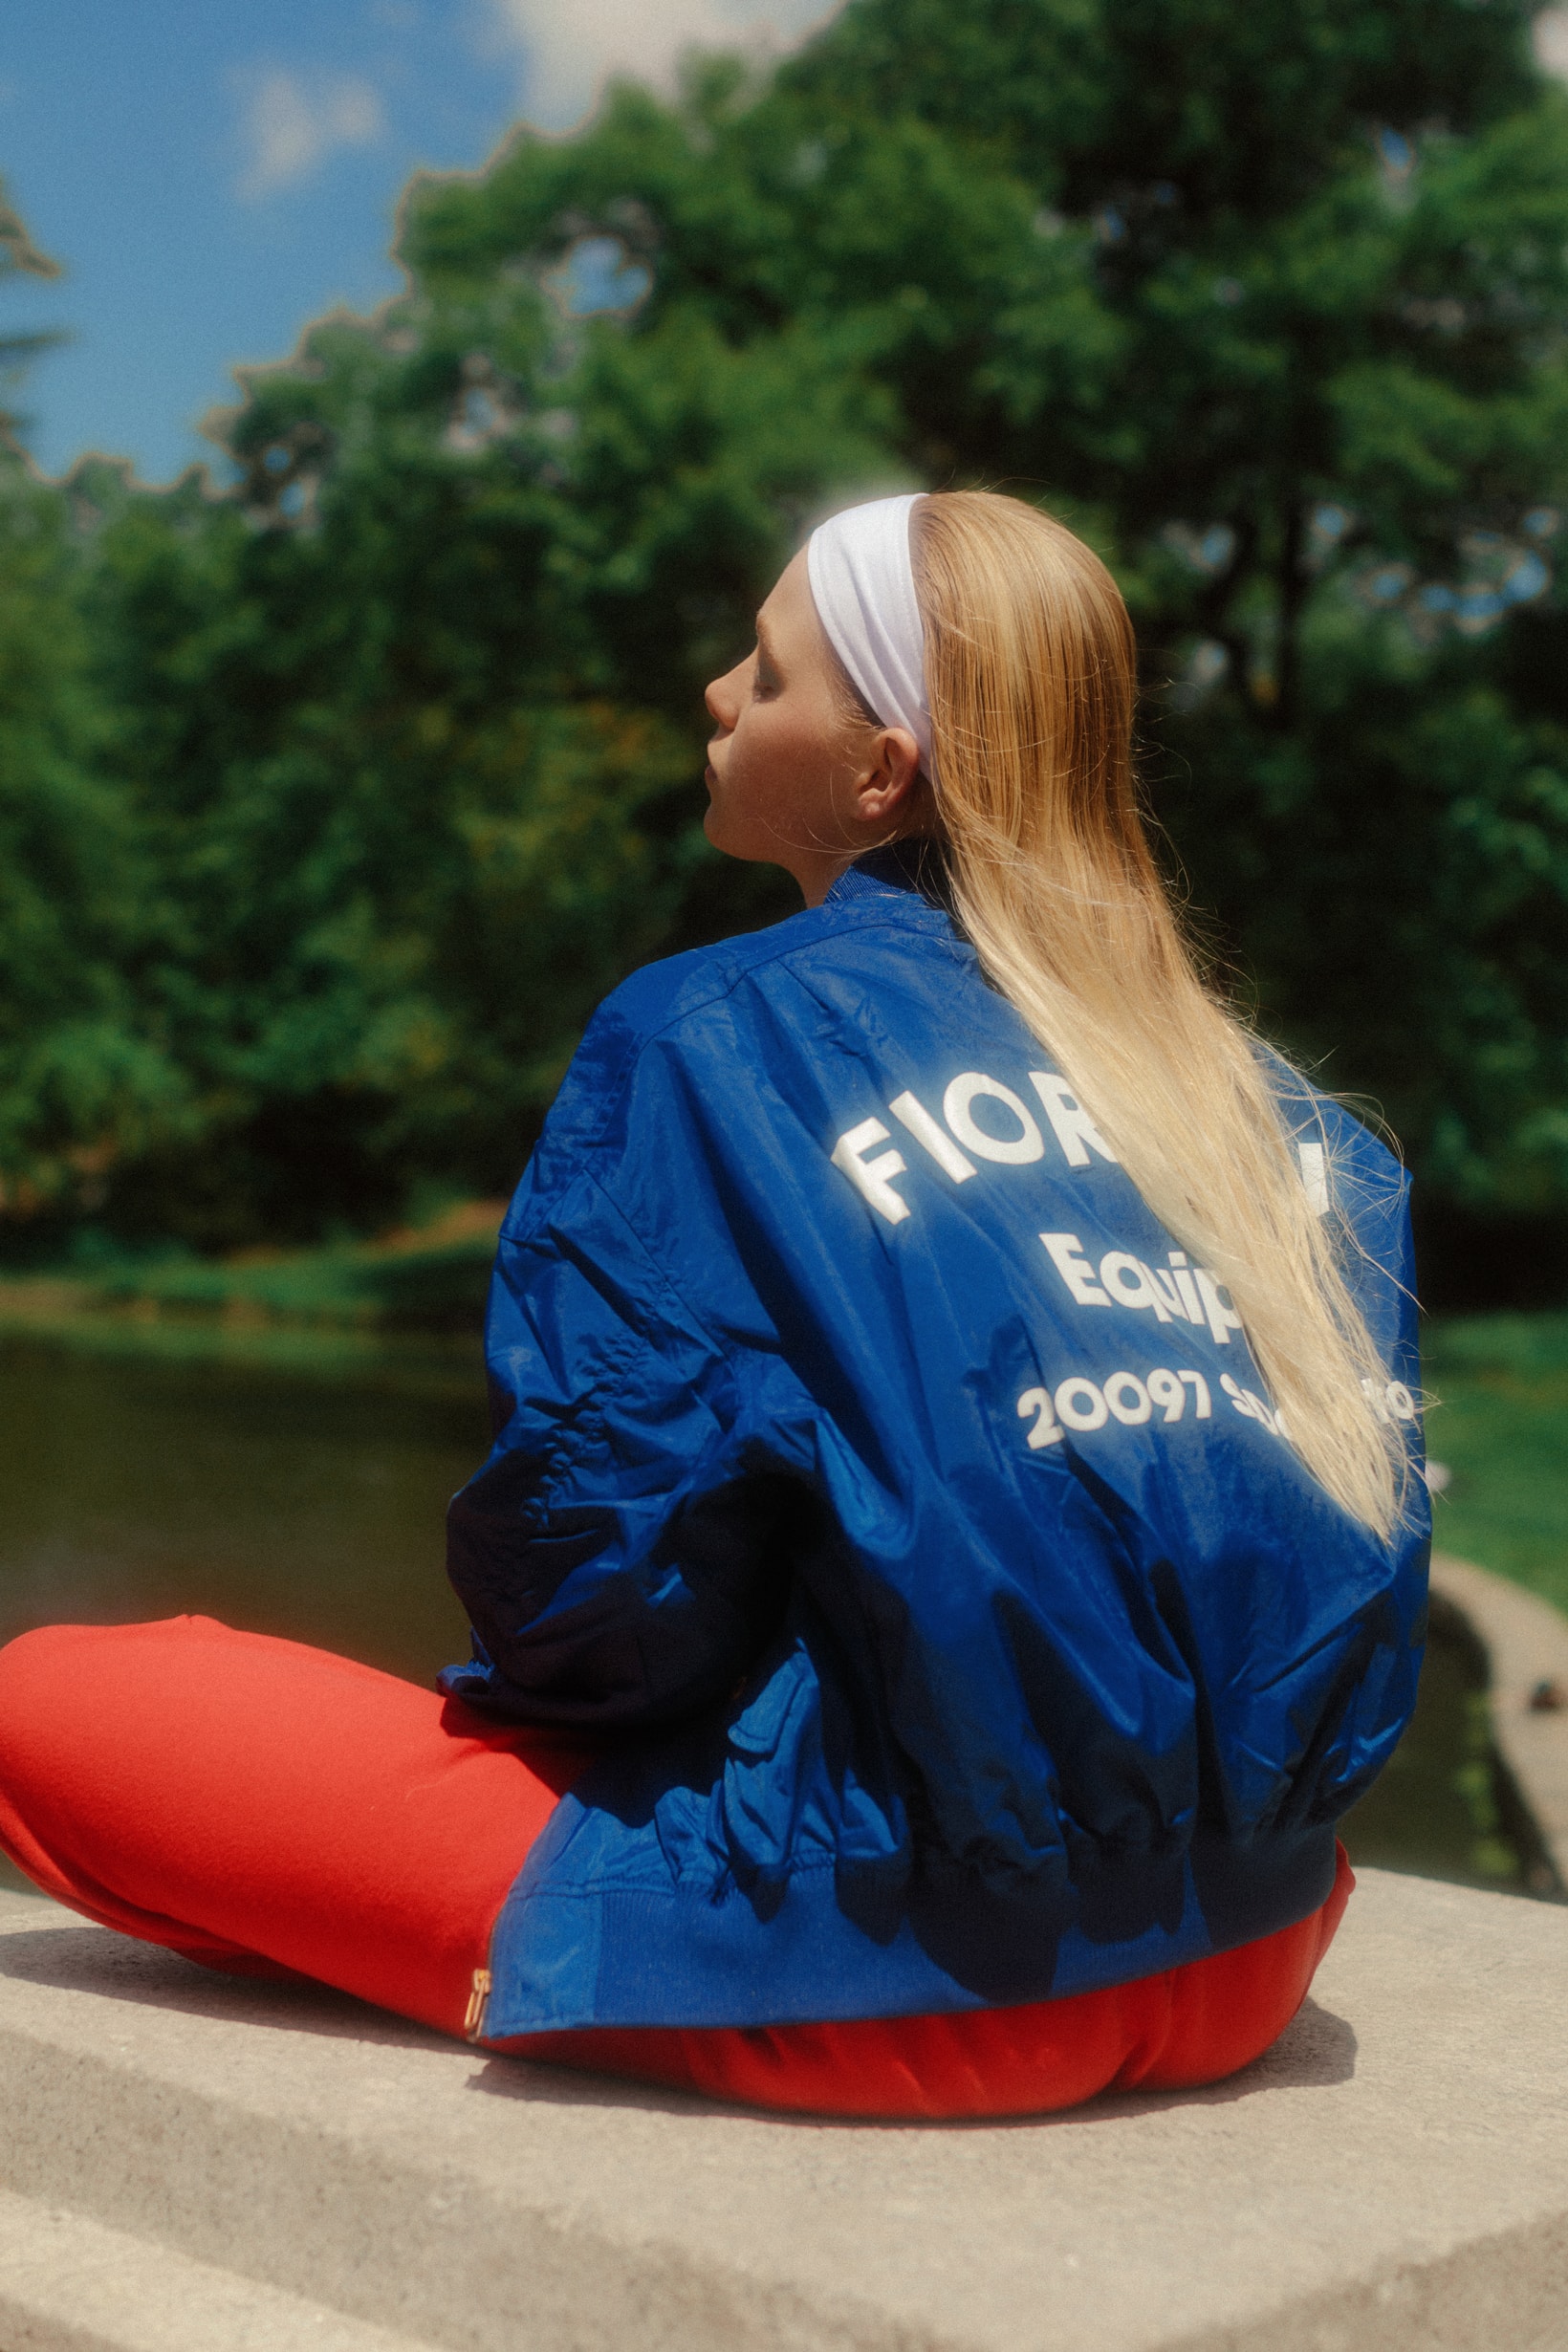 The Concept NY Vintage Summer Editorial Fiorucci Jacket Blue Sweatpants Red